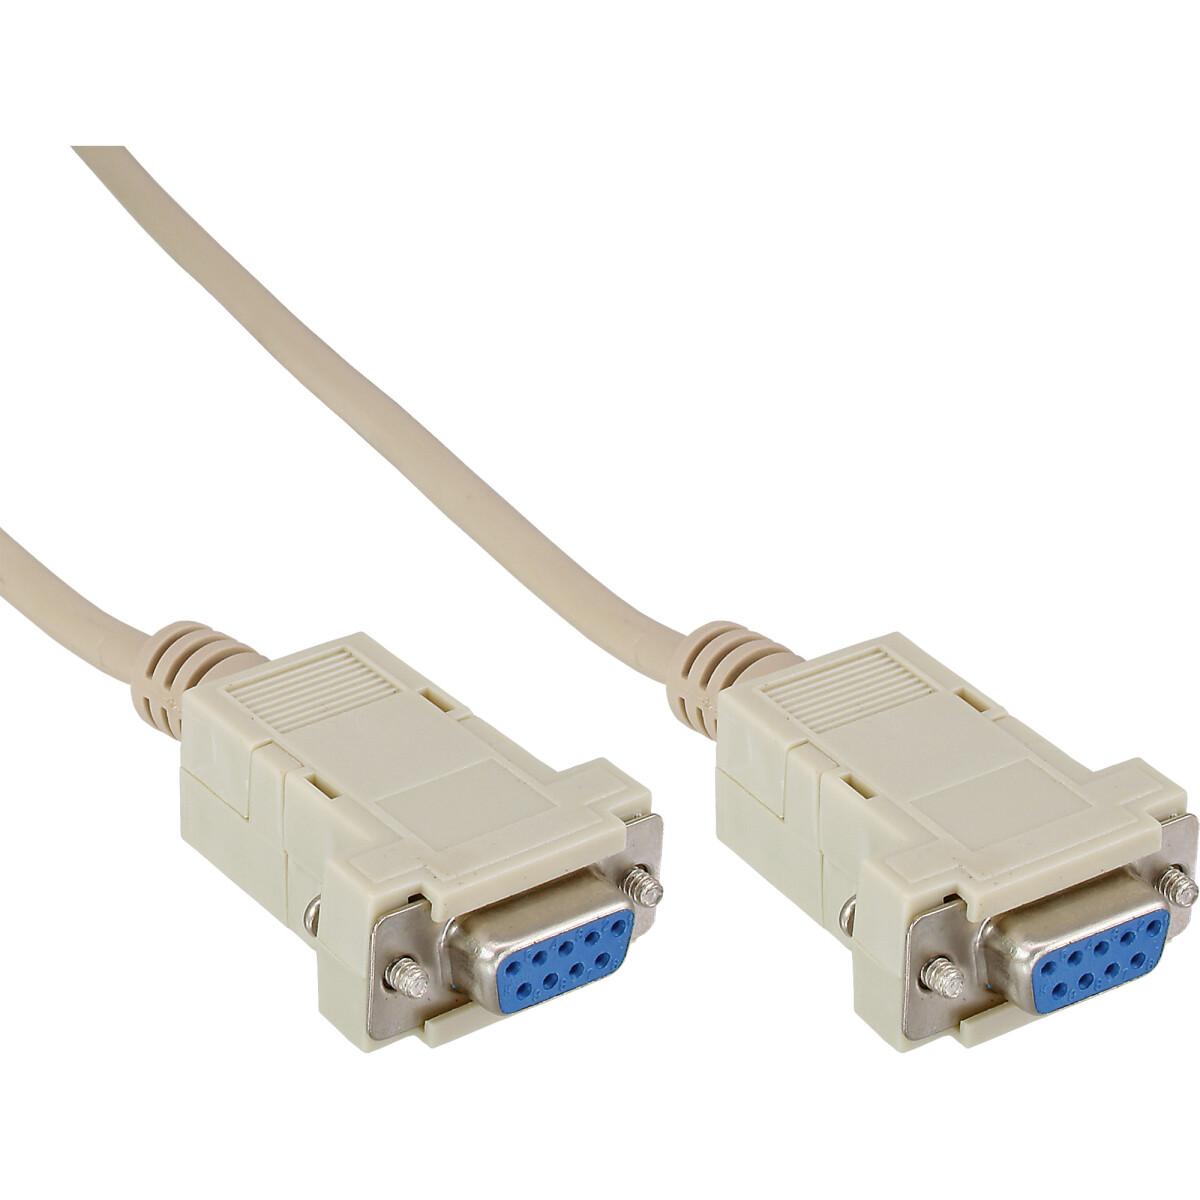 InLine® null modem cable 9 Pin female / female,...